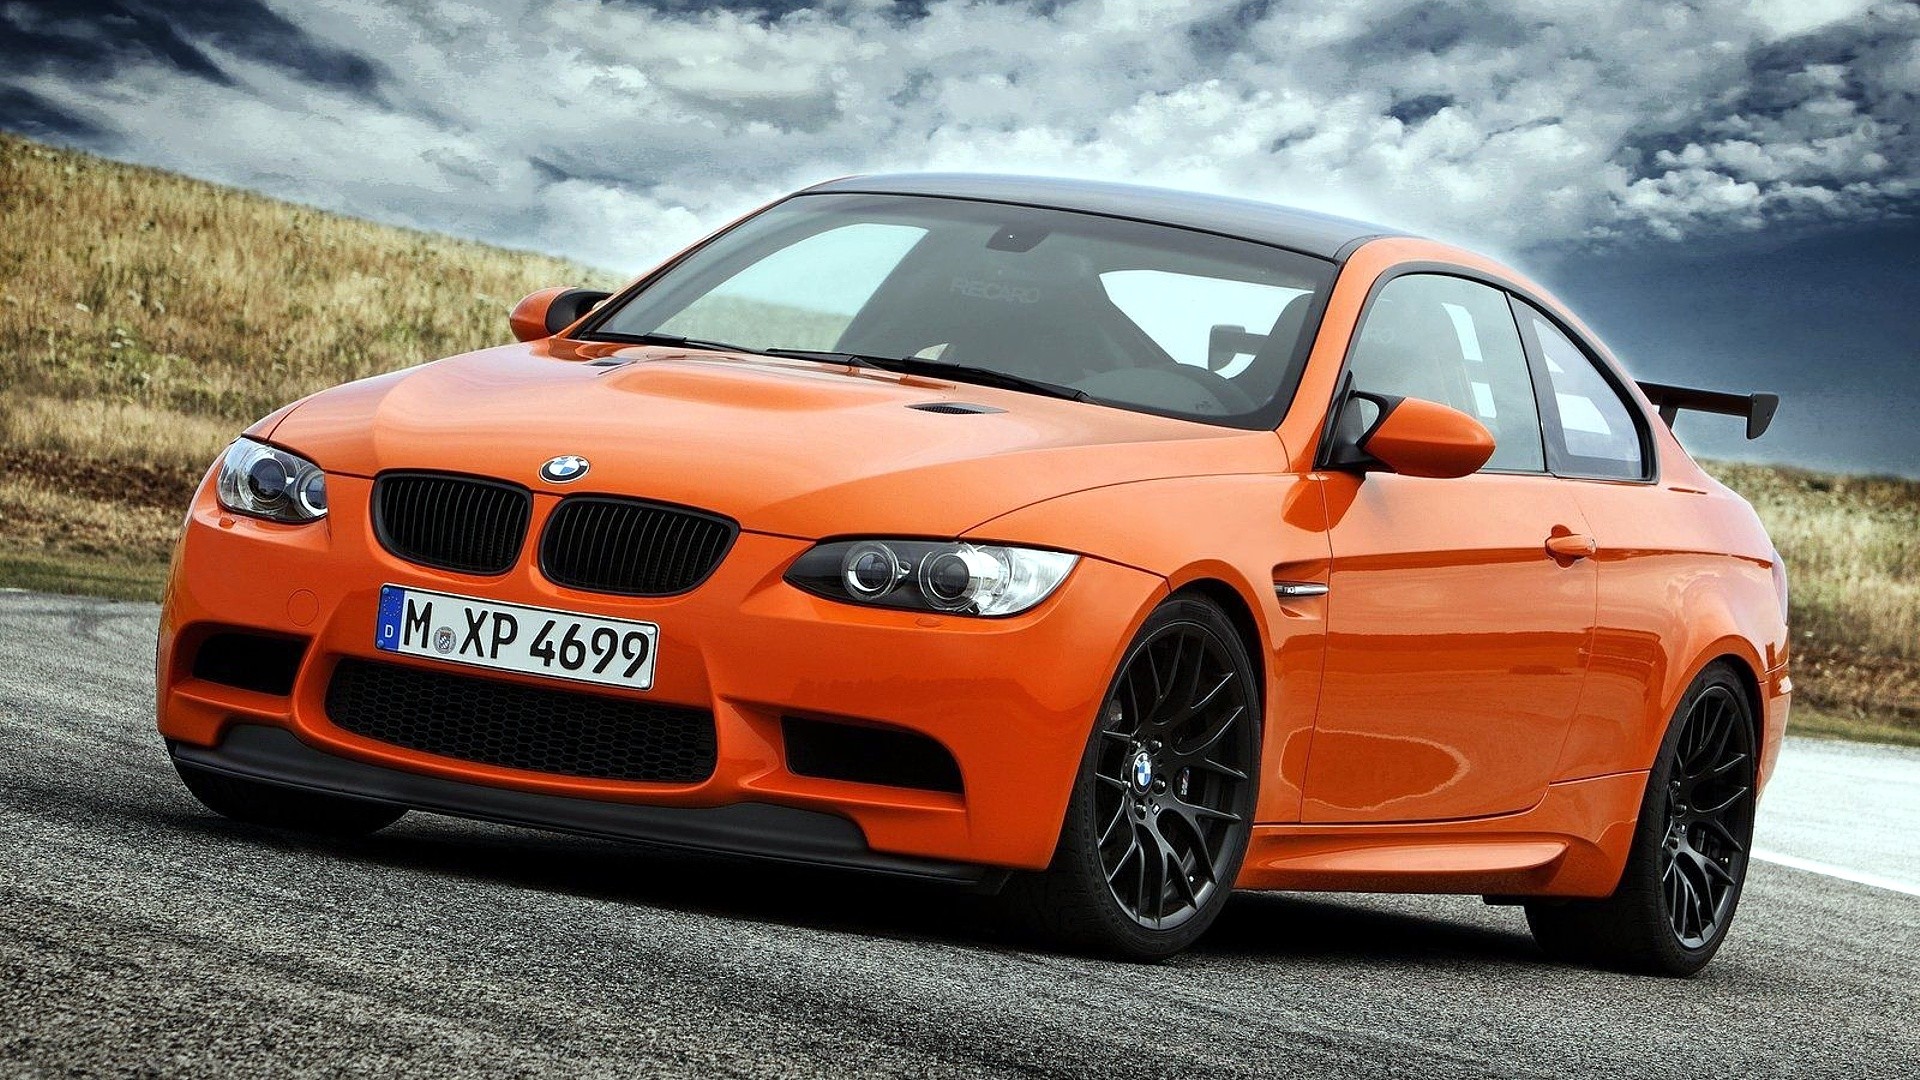 Bmw orange, hd wallpapers from -> www.HotSzots.eu | Vroom Vroom CARS |  Pinterest | BMW, Cars and BMW M3